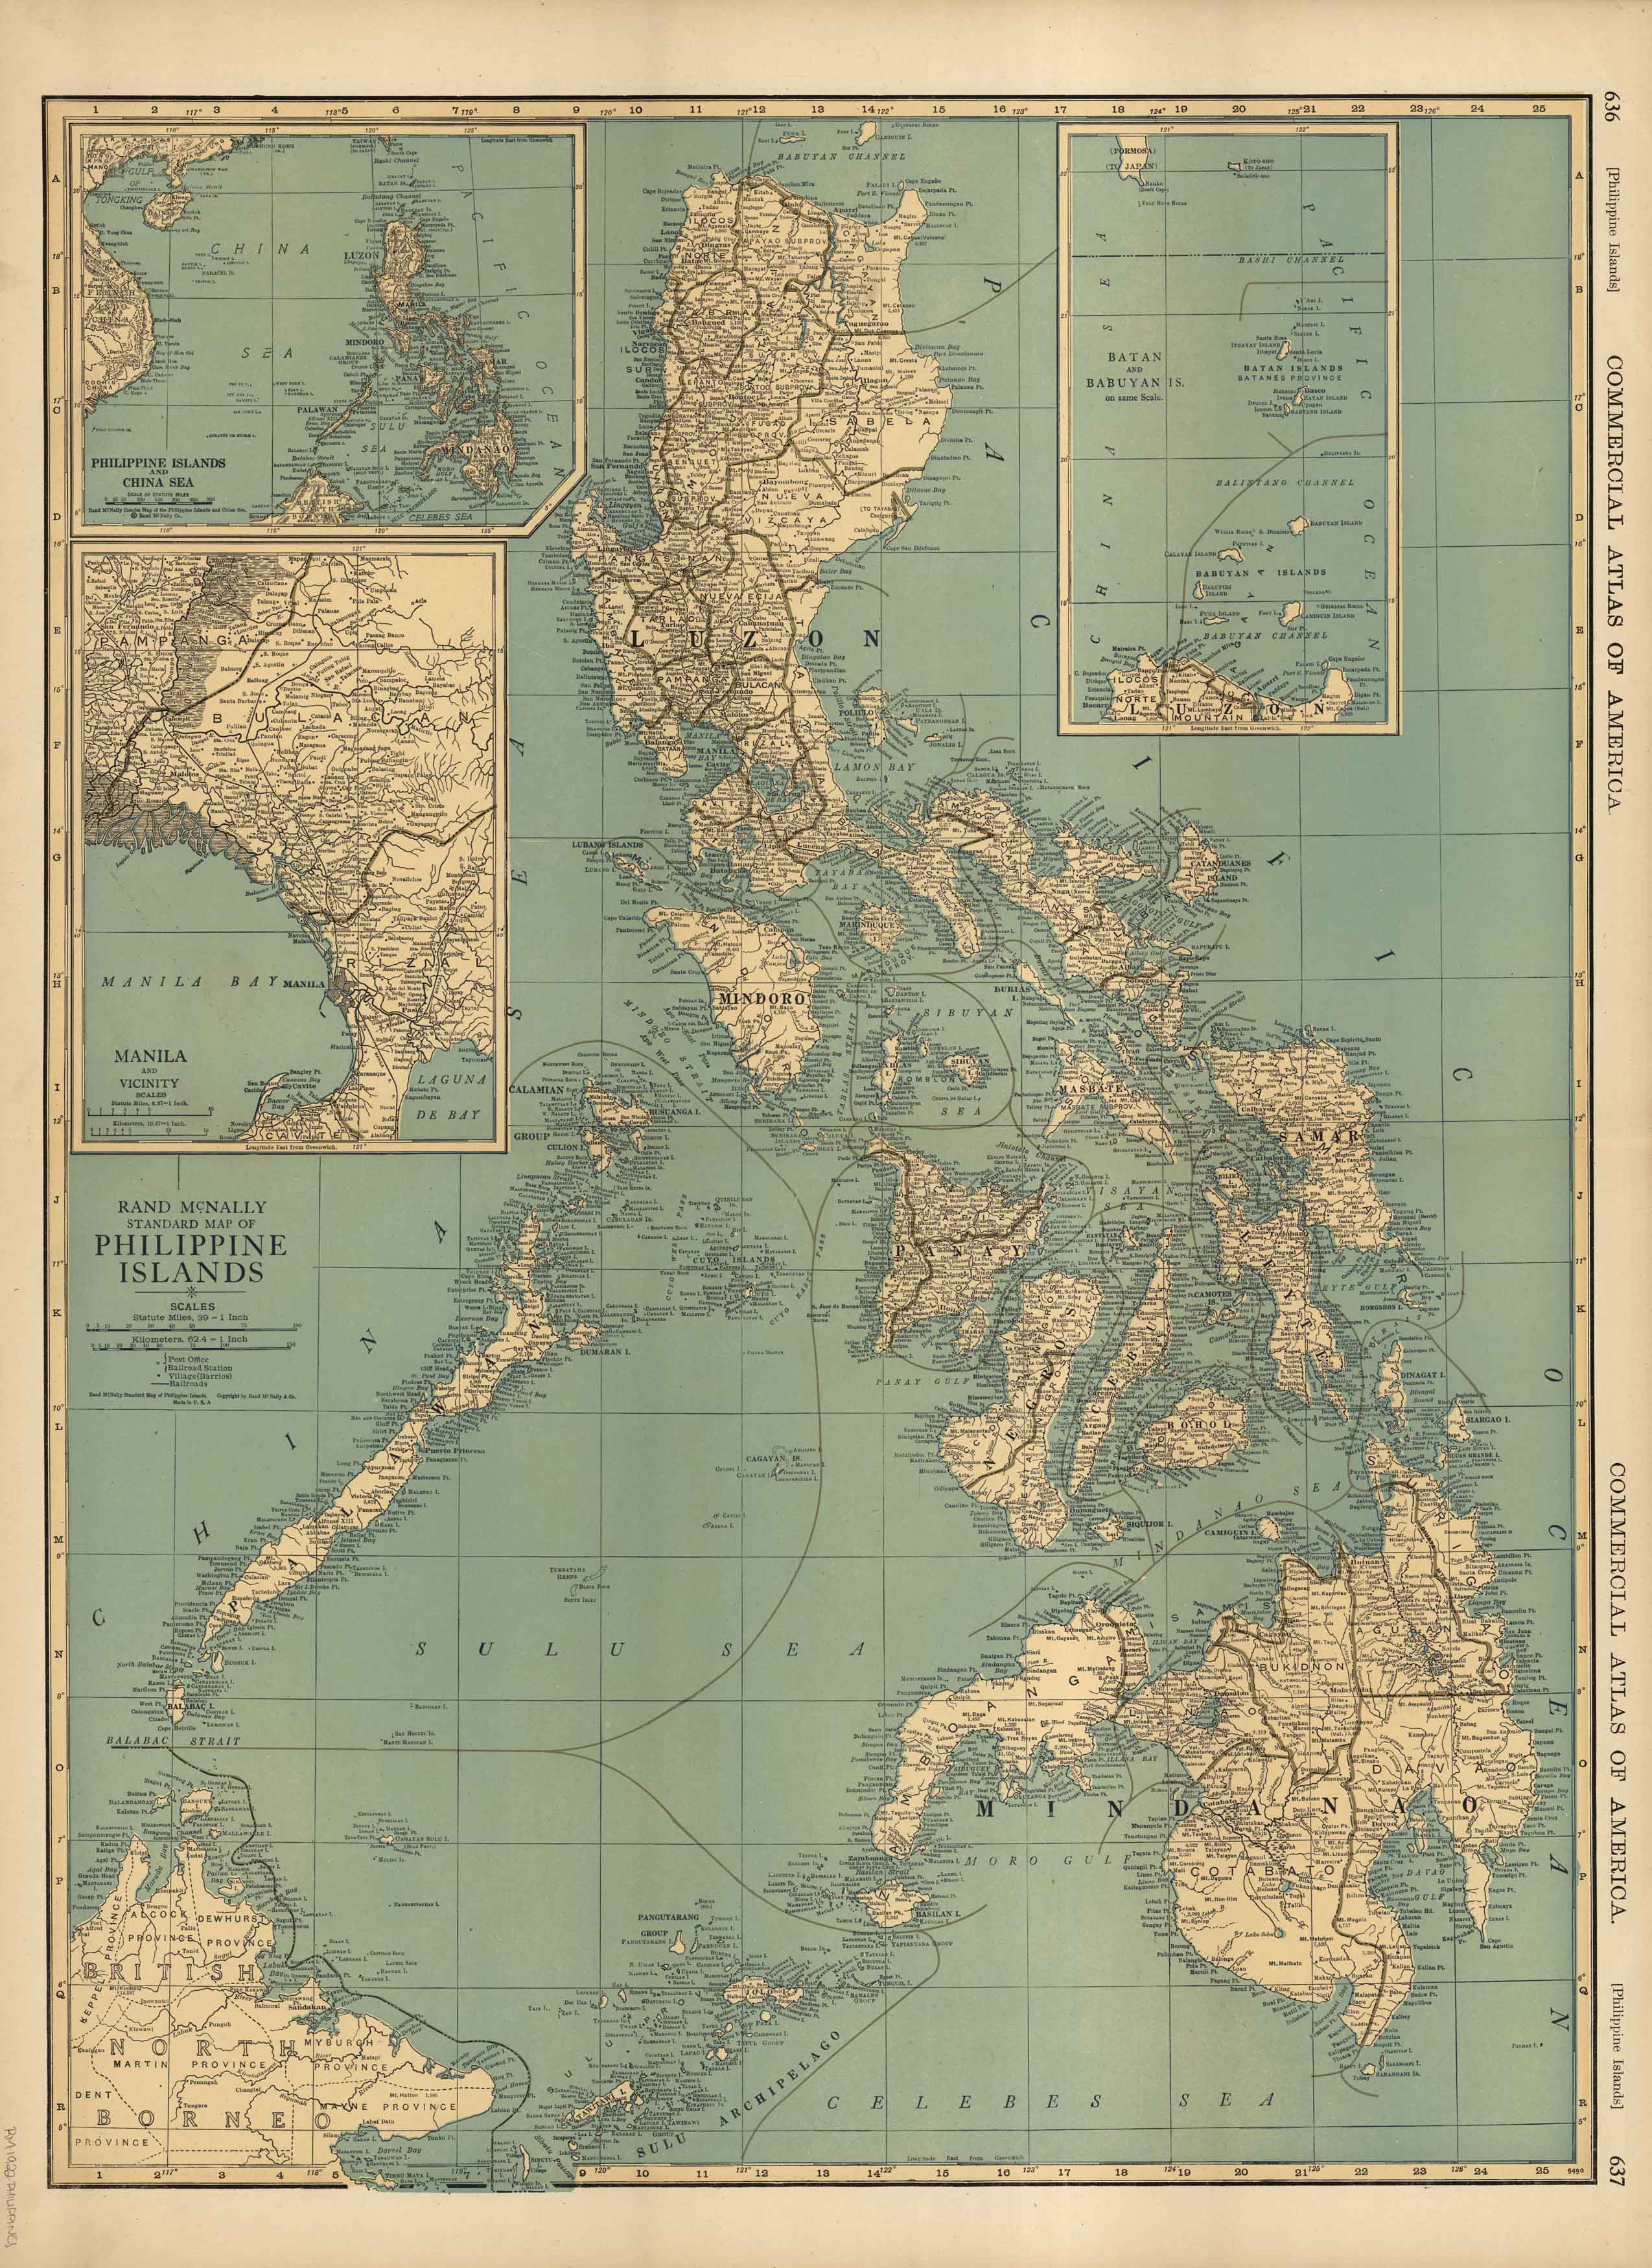 McNally's 1922 Map of the Philippines - Art Source International